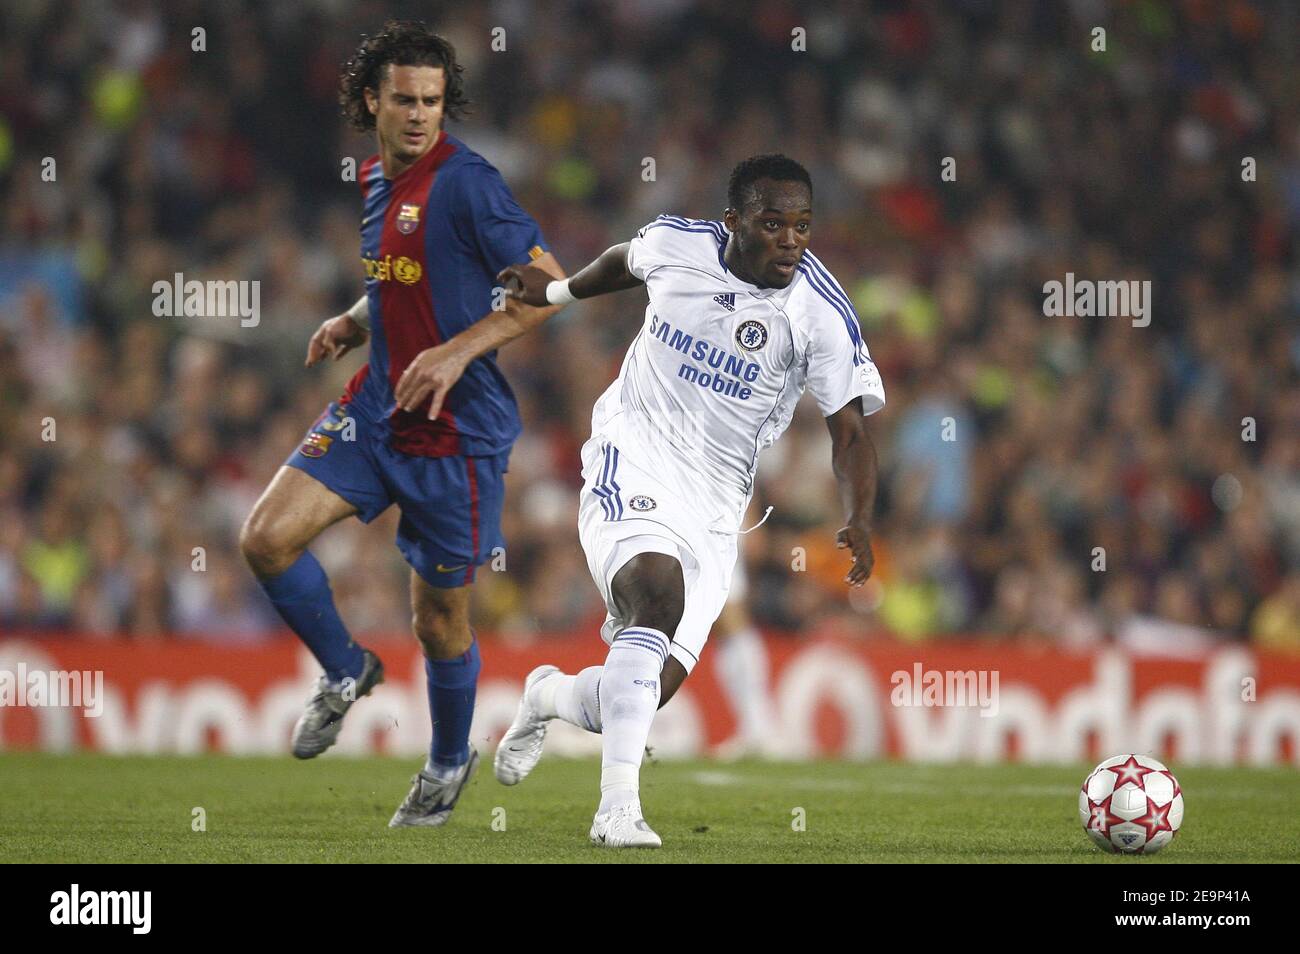 Barcelona's Carles Puyol and Chelsea's Michael Essien battle for the ball during the UEFA Champions League, Group A, Barcelona vs Chelsea at the Camp Nou stadium in Barcelona, Spain on October 31, 2006. The match ended in a 2-2 draw. Photo by Christian Liewig/ABACAPRESS.COM Stock Photo